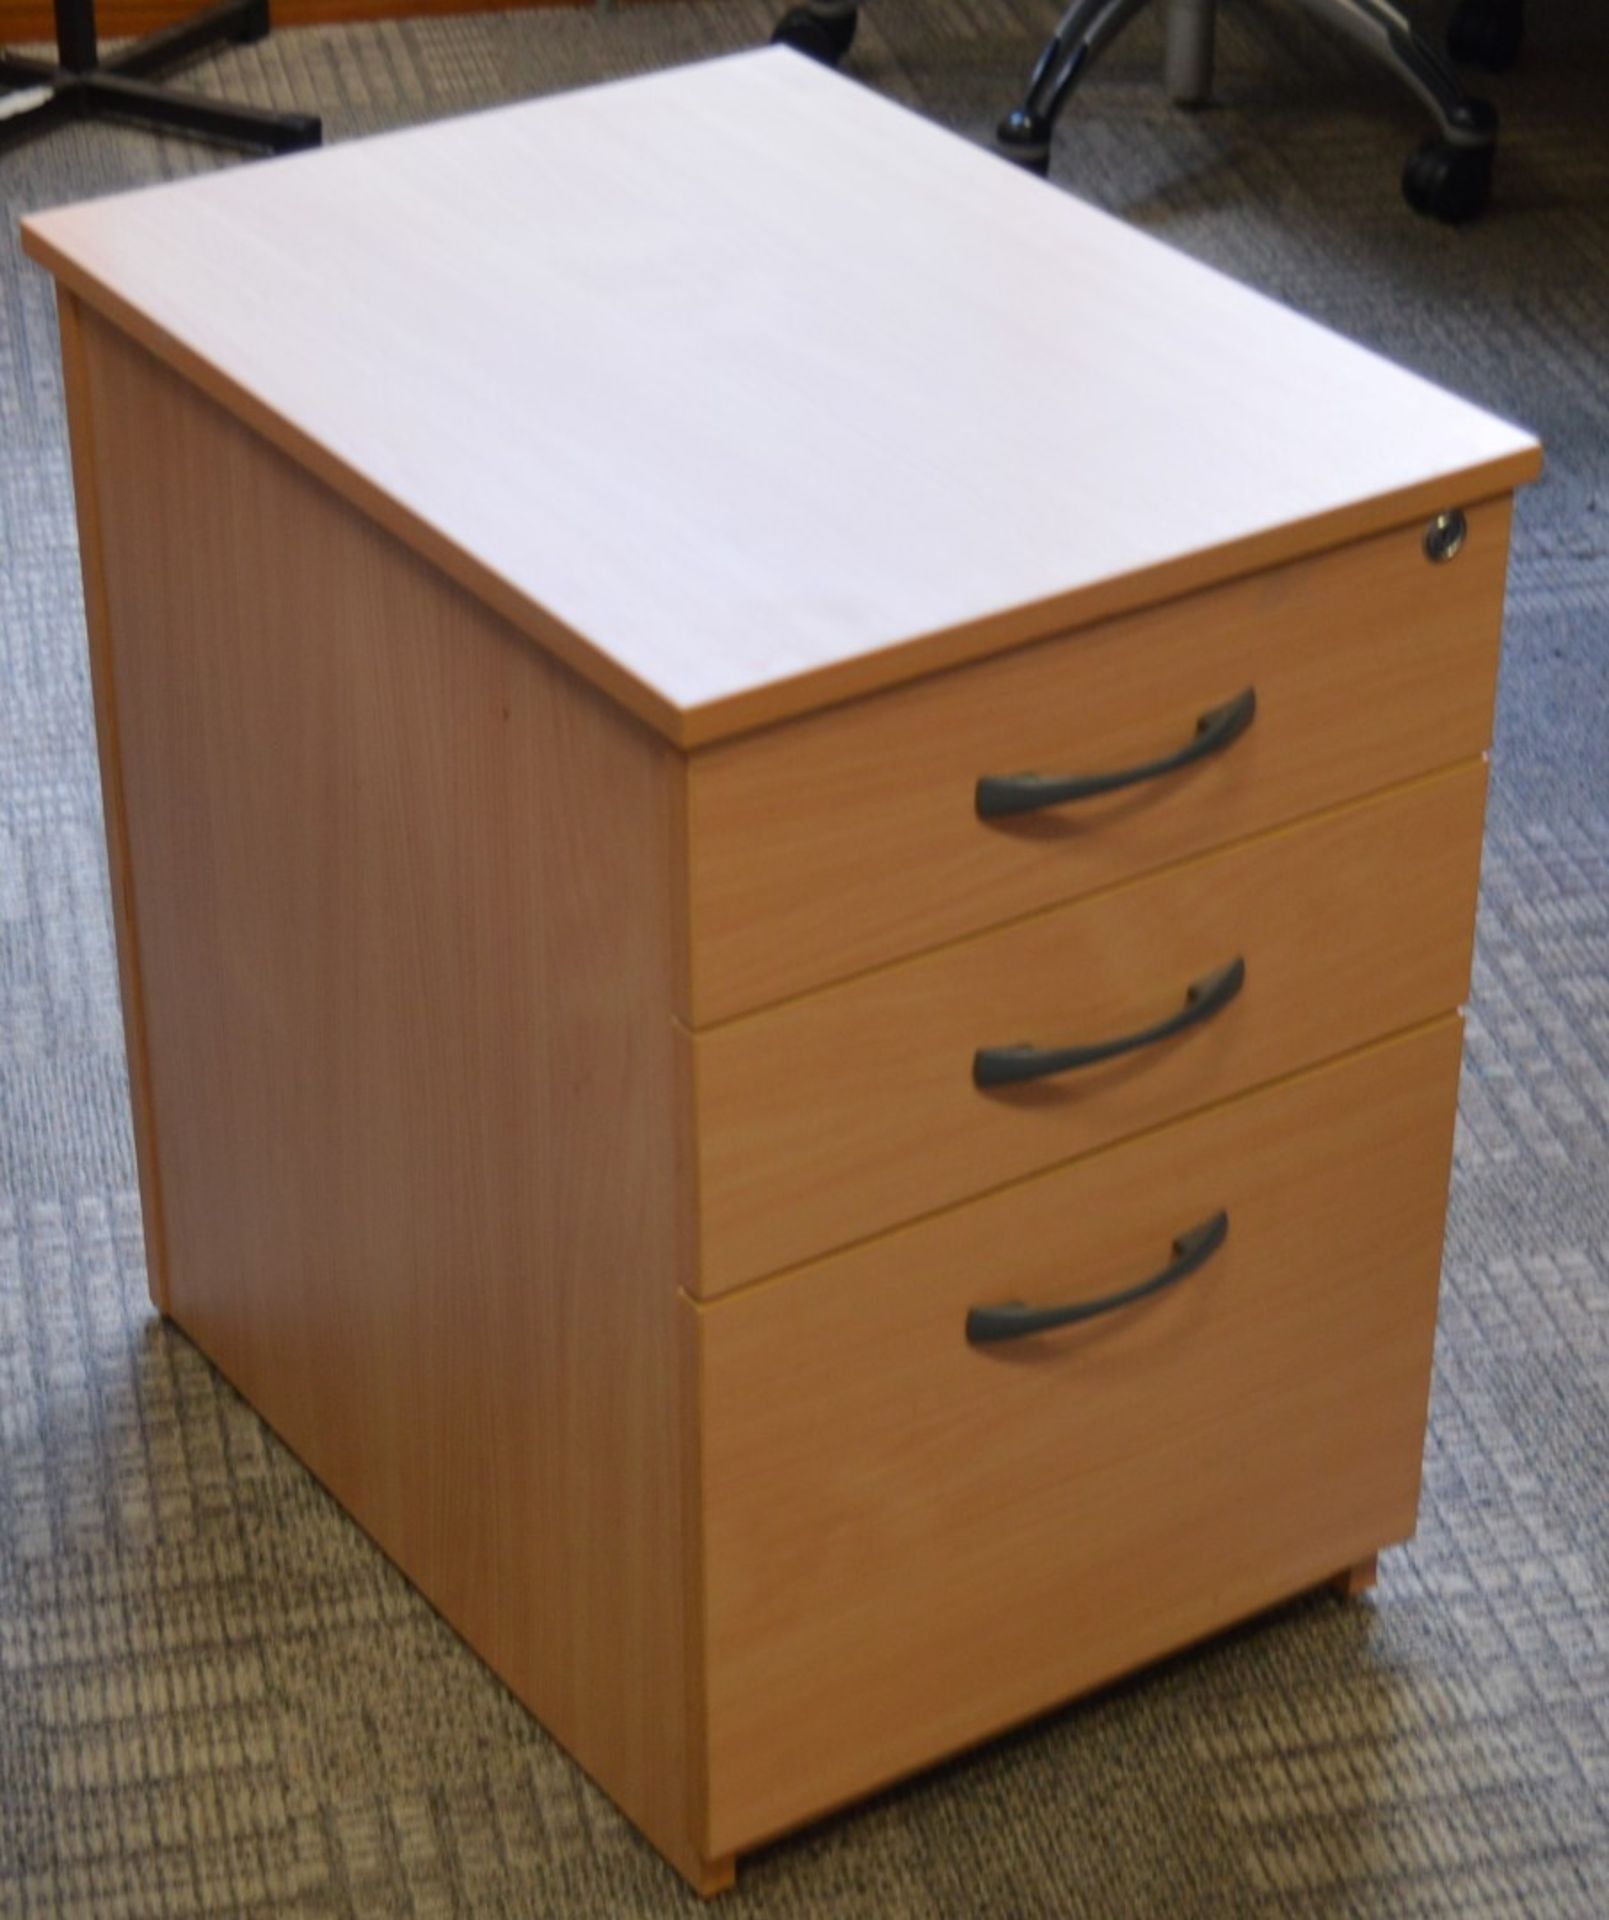 1 x Three Drawer Mobile Pedestal Drawers - With Key - Modern Beech Finish - Two Storage Drawers - Image 6 of 6